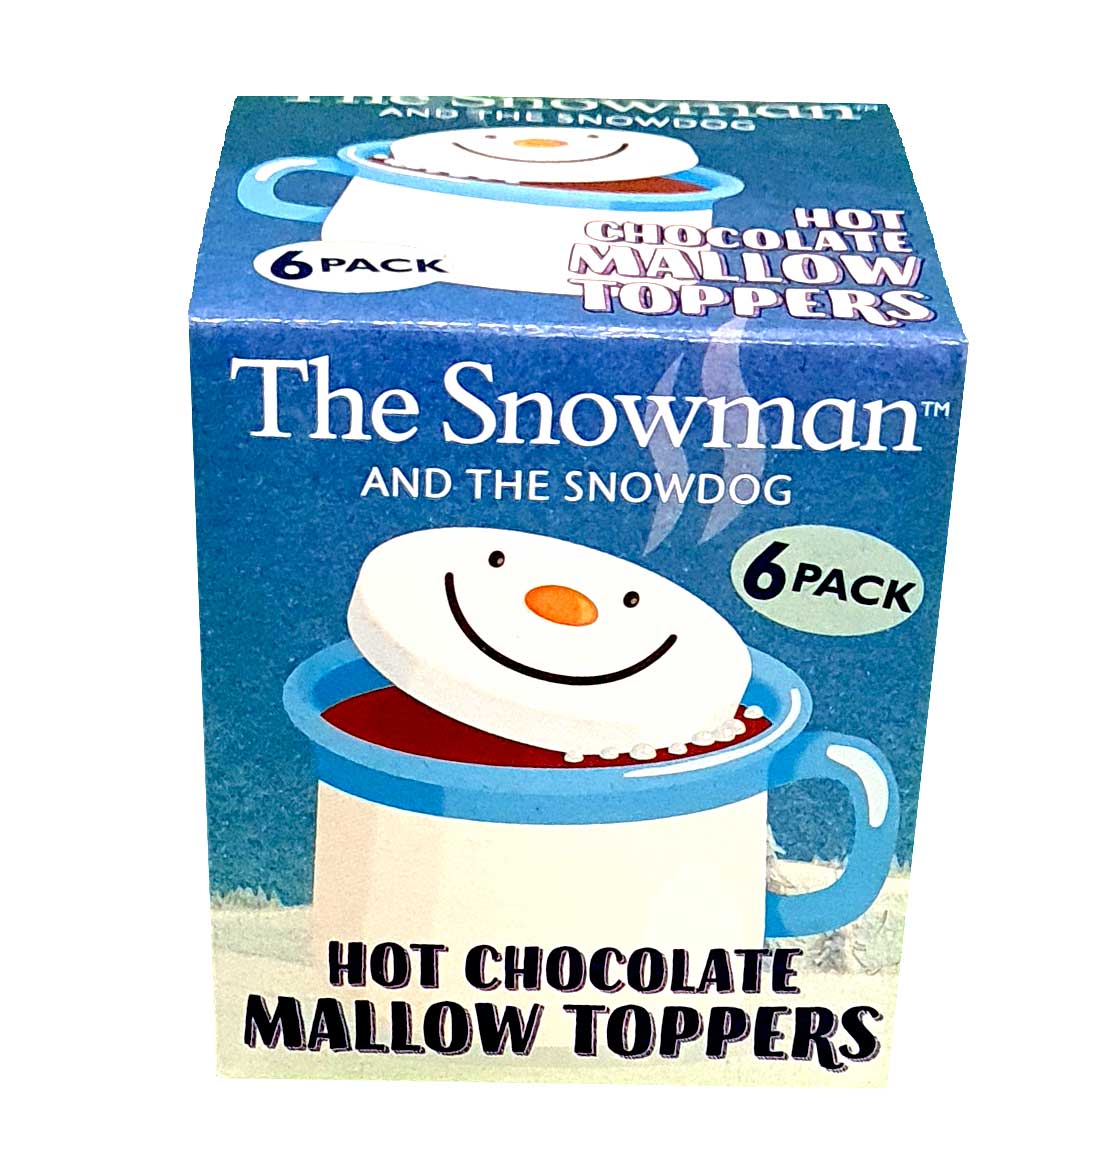 https://www.sweetco.ie/image/cache/catalog/sweetco/product/rose/snowman-hot-chocolate-mallow-toppers-1116x1163.jpg